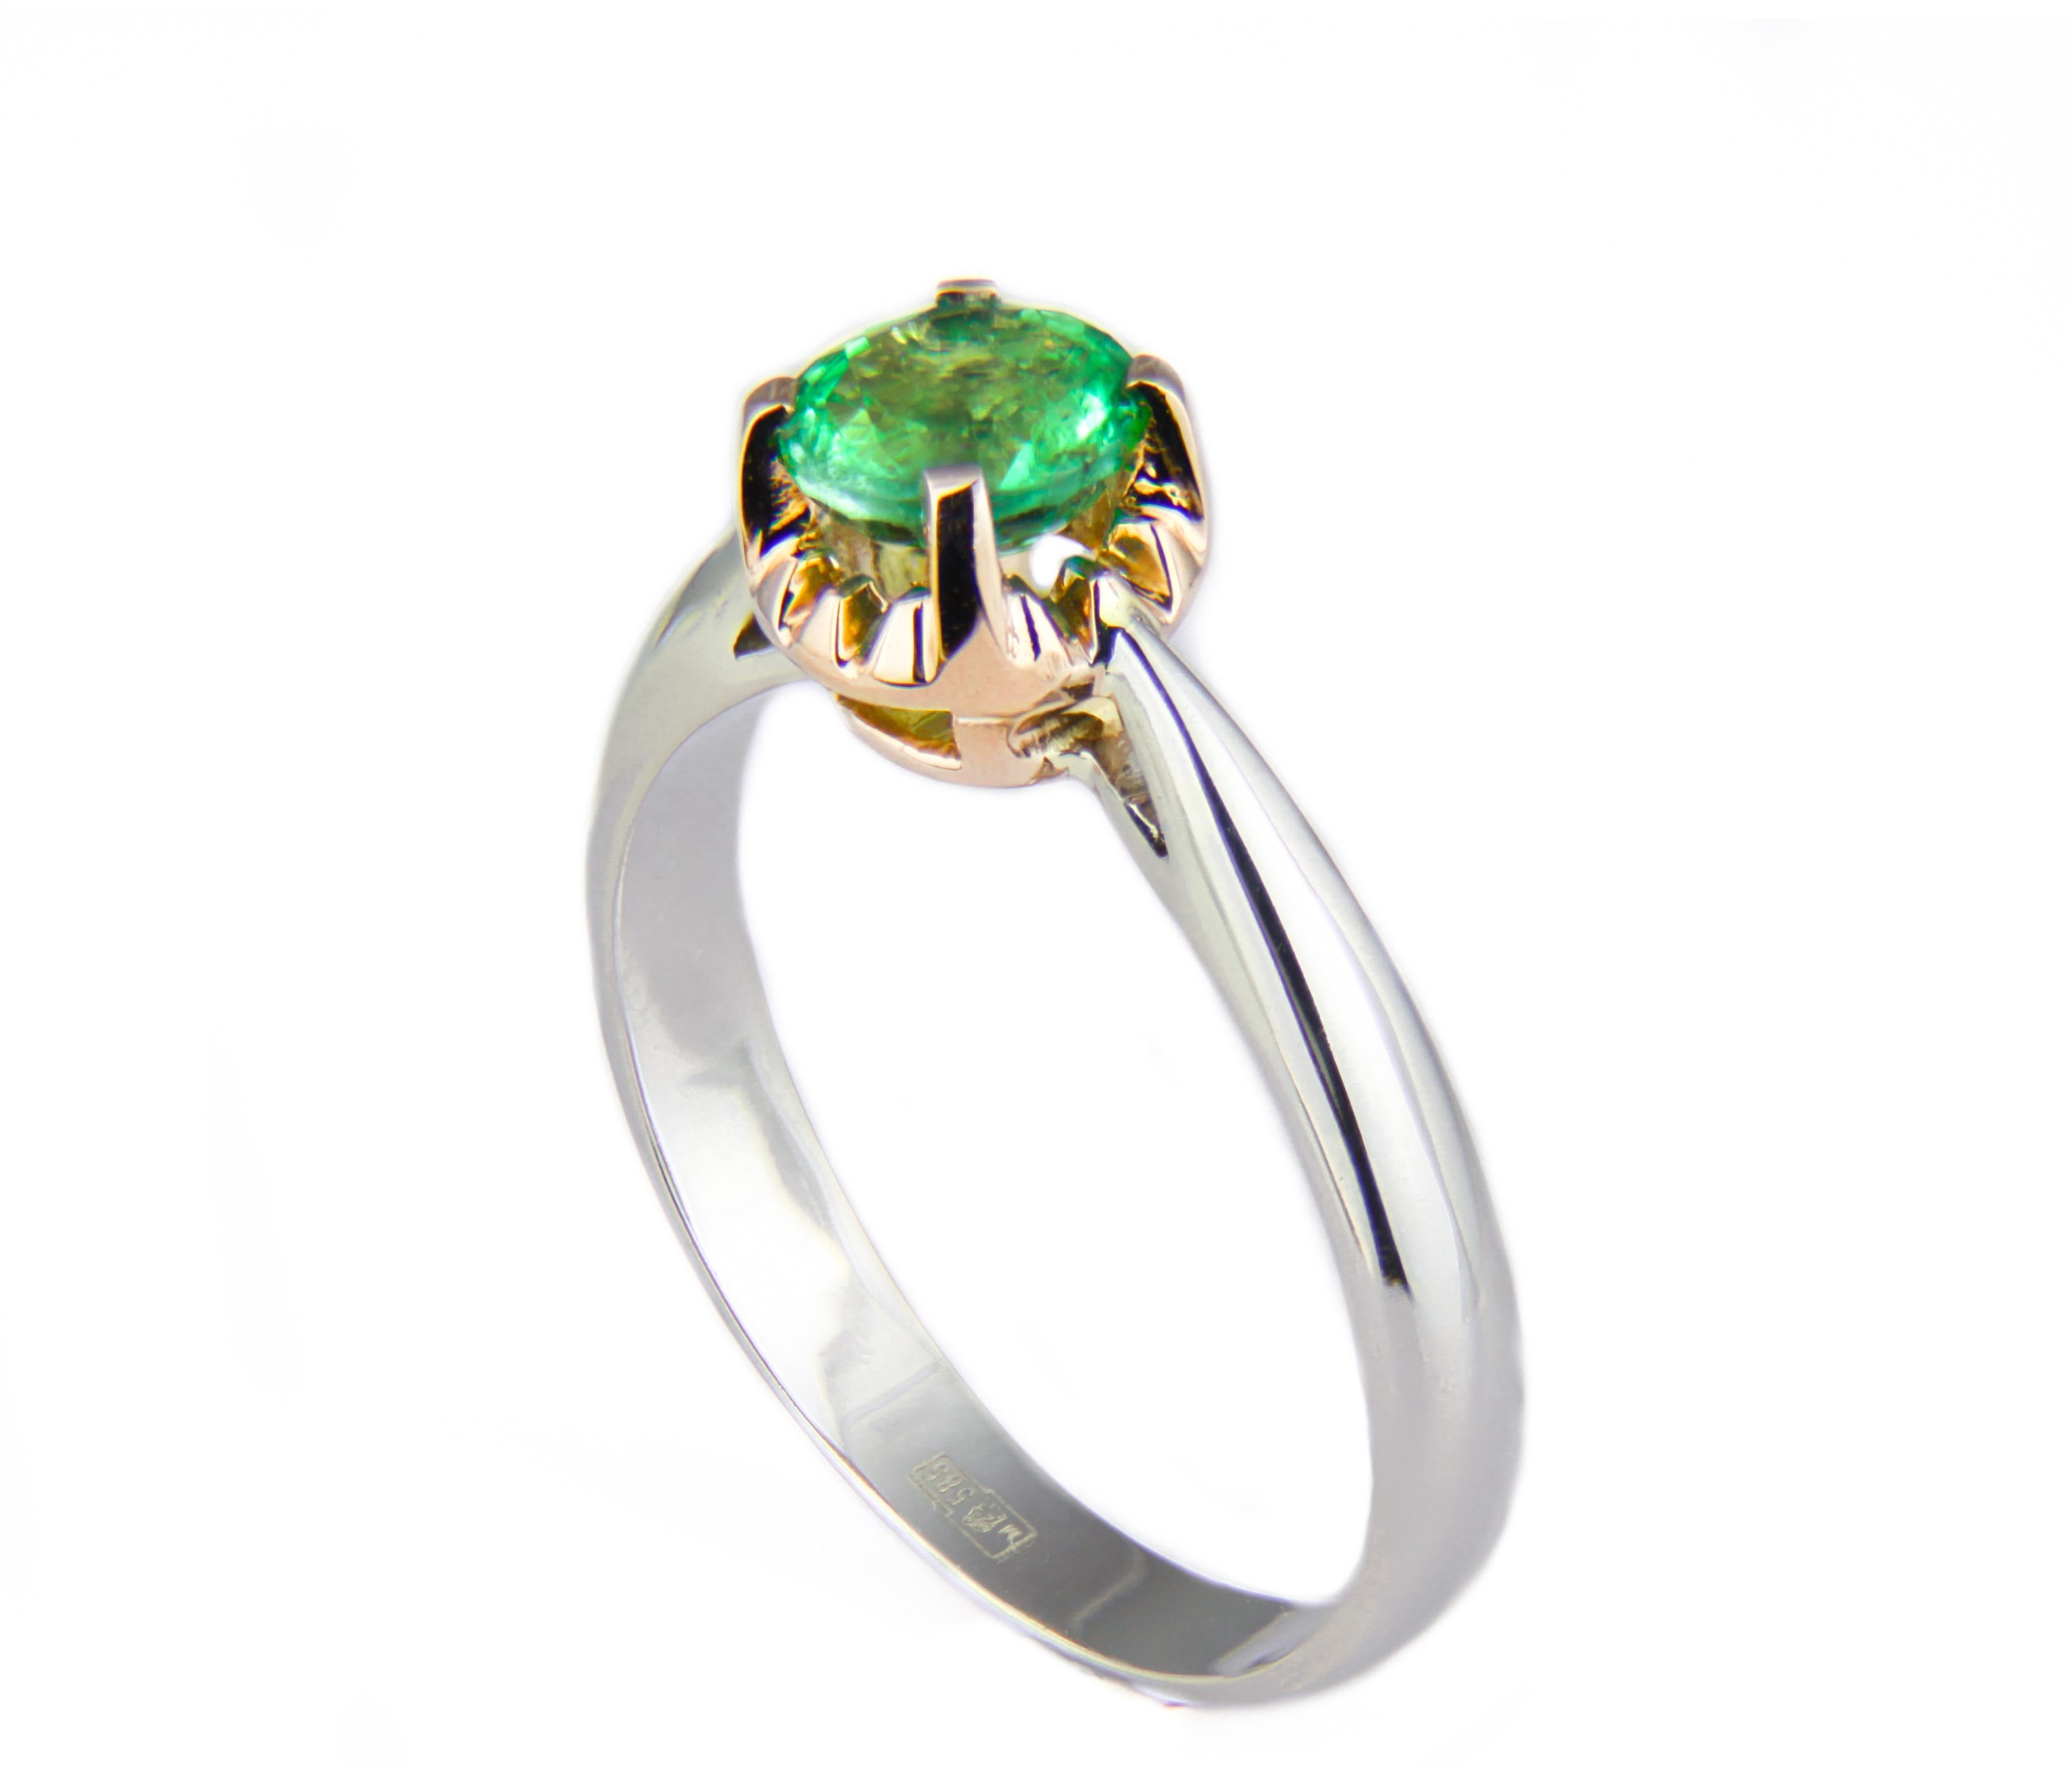 Emerald 14k gold ring. 
Emerald engagement ring. Dainty Emerald ring. Real emerald ring. Emerald engagement ring. Emerald vintage ring.

Metal: 14k solid gold. 2 color tone gold: white and yellow.
Weight approx. 2.1 g. - depends of choosen